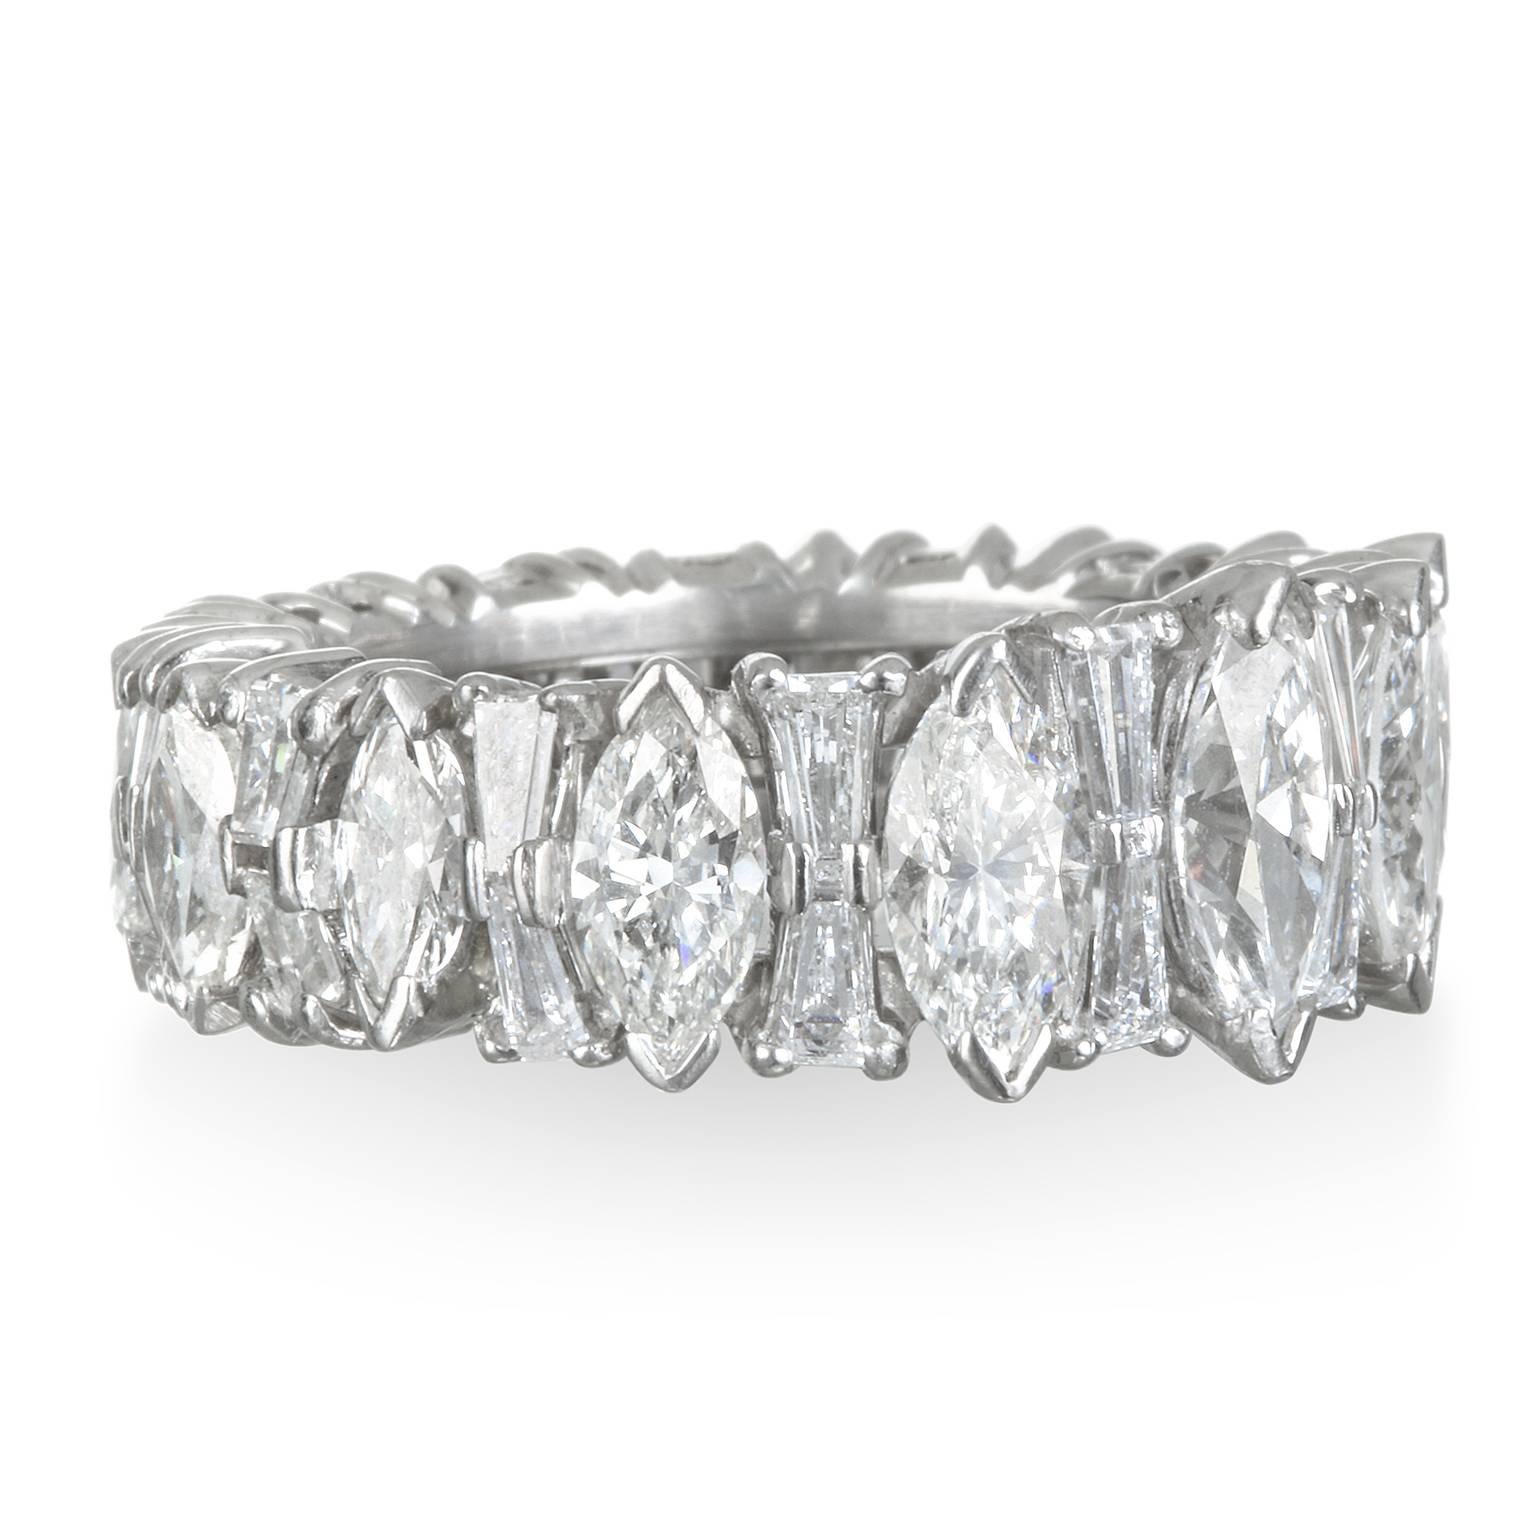 A statement piece! Beautiful on its own or stack to create your very own style. Handcrafted in Platinum and slightly tapered for comfort, this elegant design transcends time.  Circa 1950's
Marquise diamonds - 14 stones weigh 5.0 carats. 
Tapered